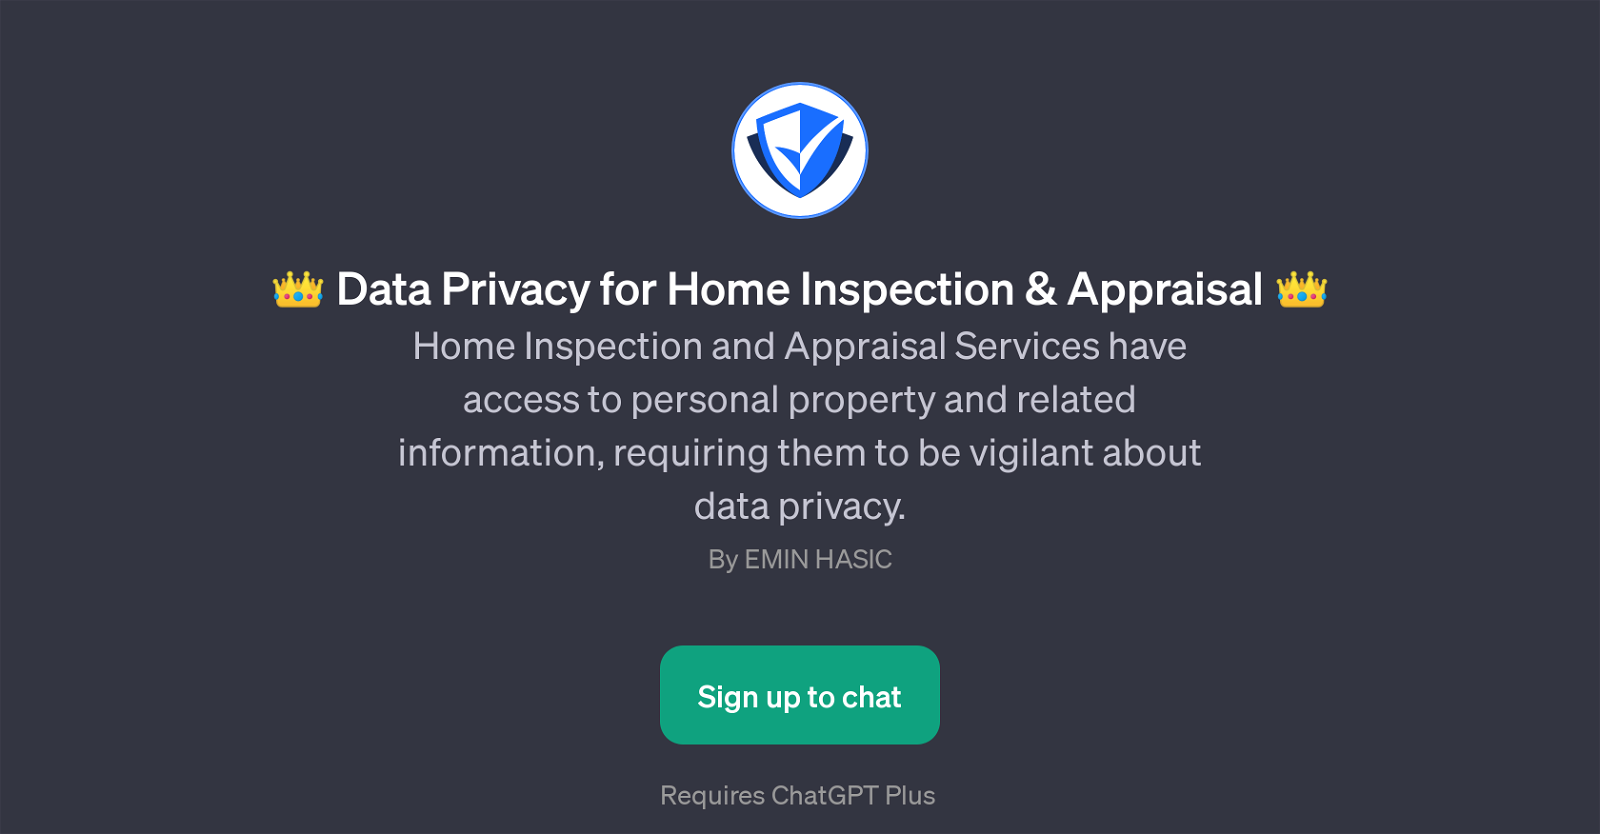 Data Privacy for Home Inspection & Appraisal website